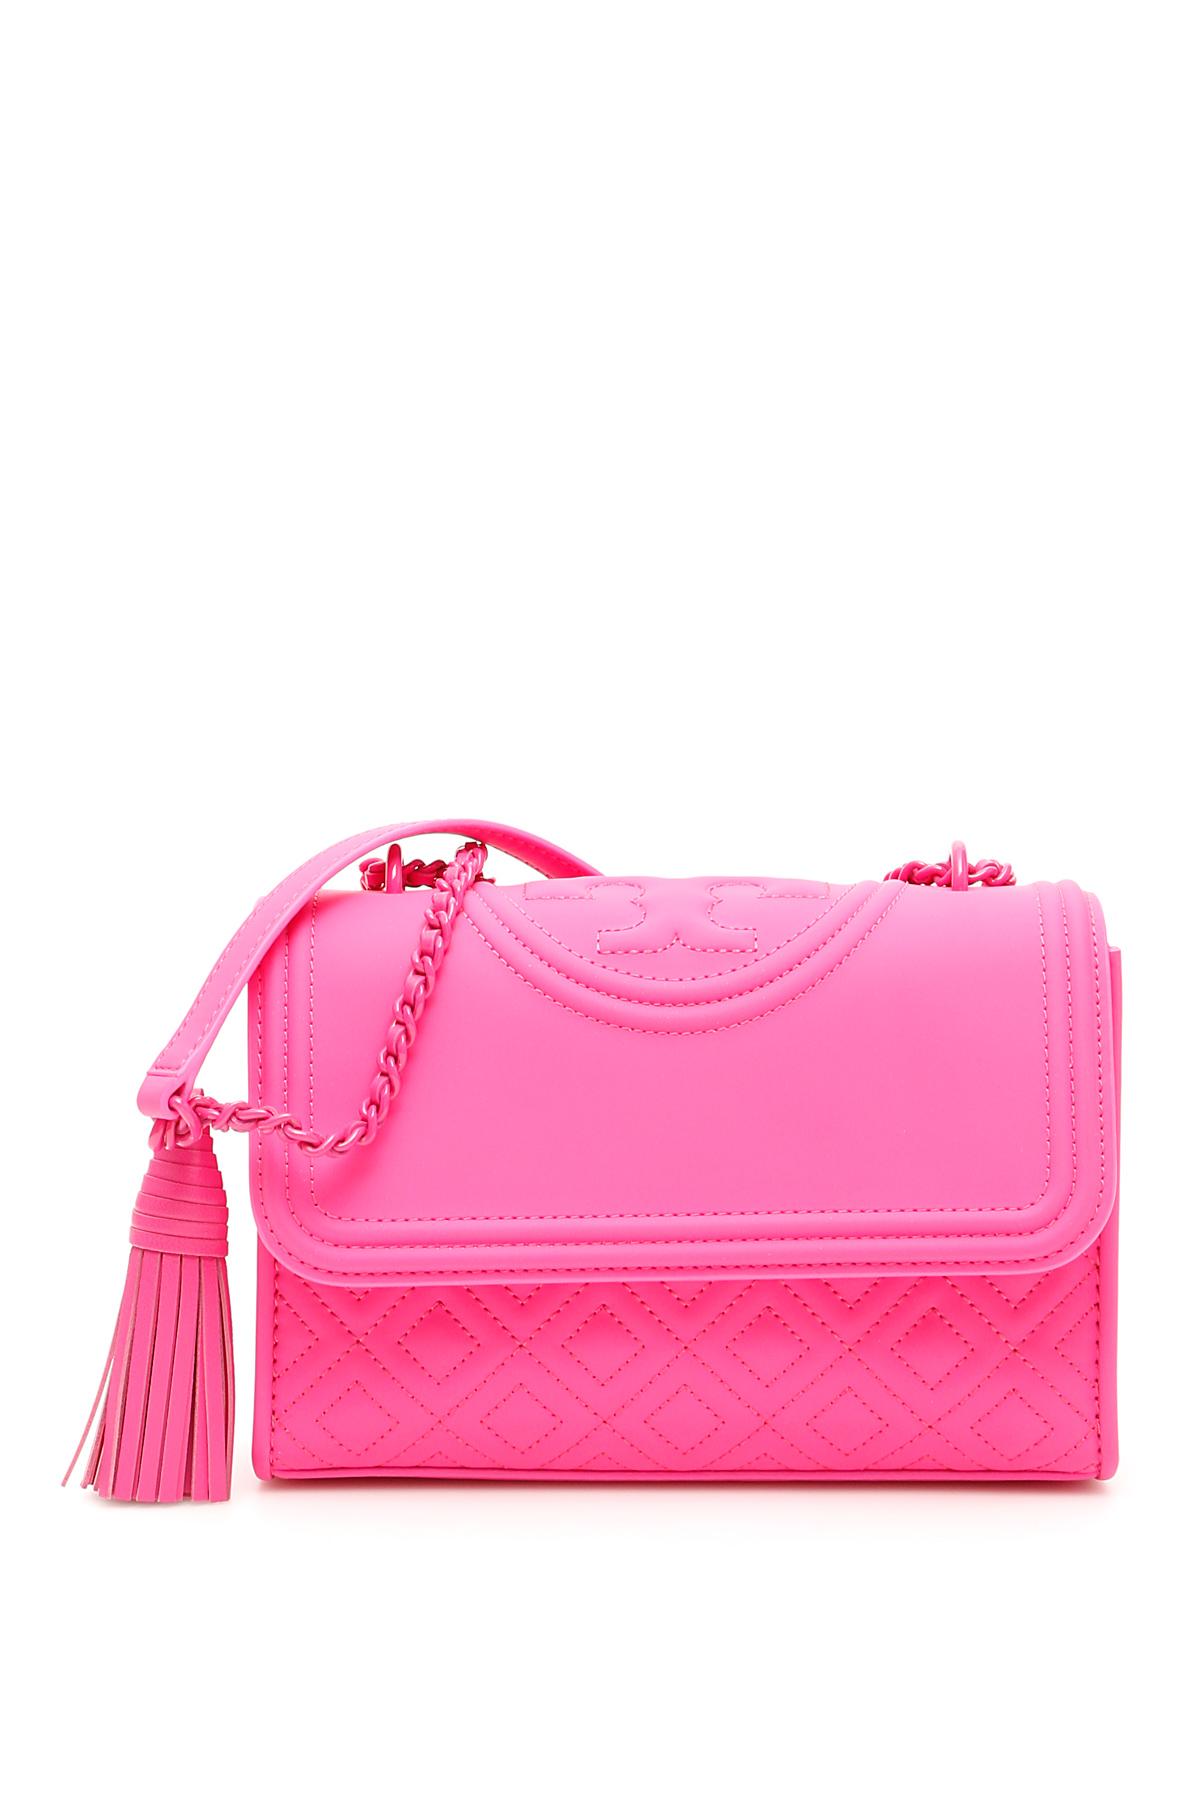 Tory Burch Matte Small Fleming Bag in Fuchsia,Pink (Pink) - Lyst